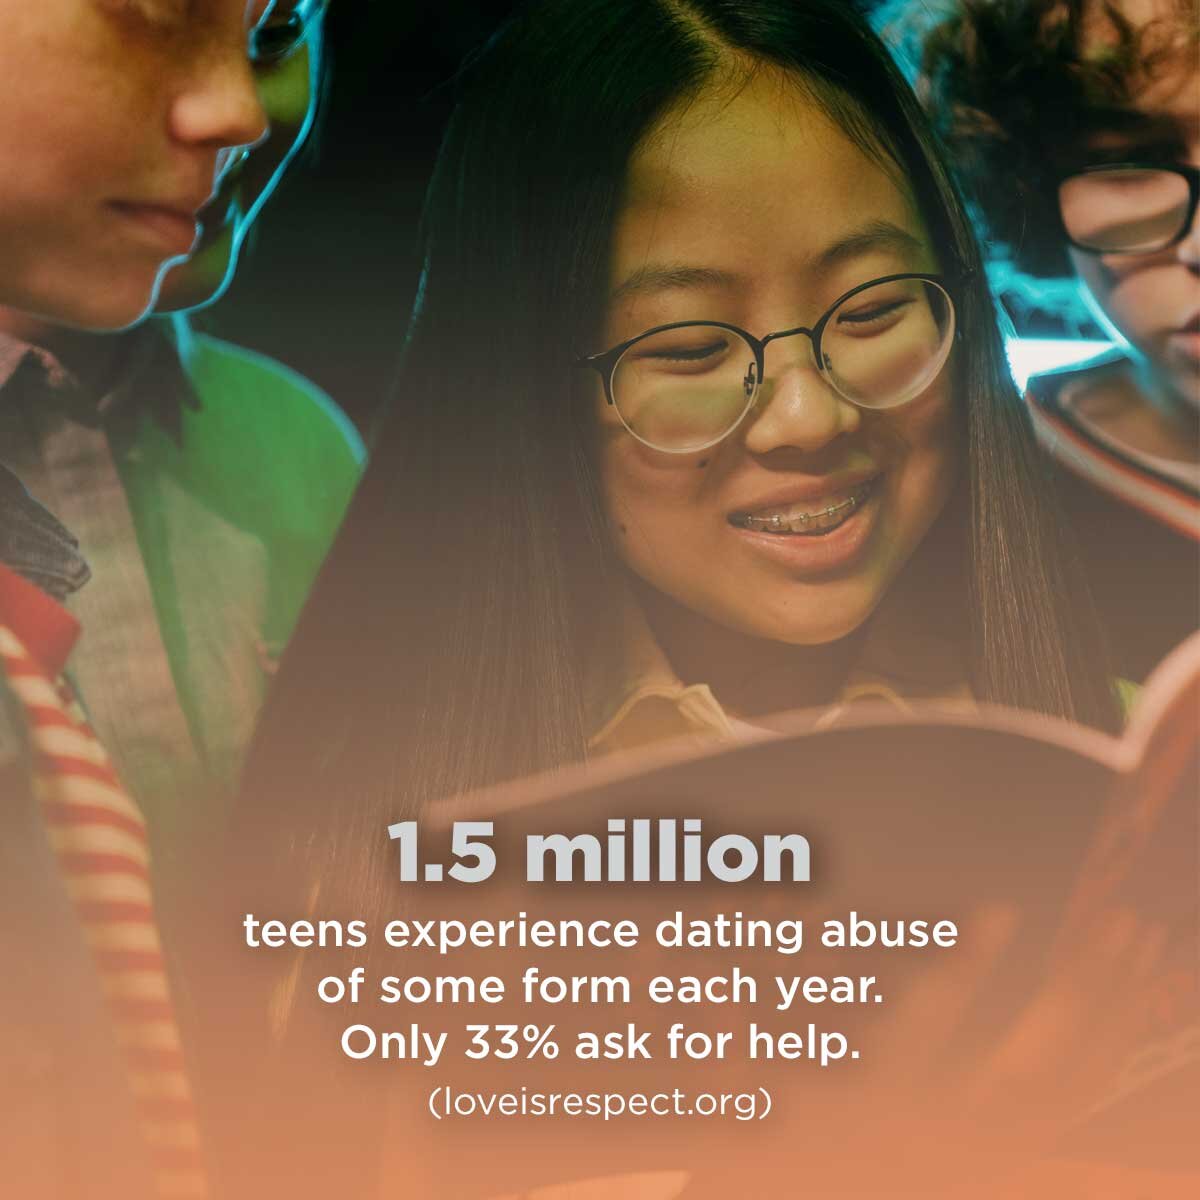 February is Teen Dating Violence Awareness &amp; Prevention Month. For additional information, please don't hesitate to view our domestic violence resources :https://www.ywcarockcounty.org/domestic-violence-resources